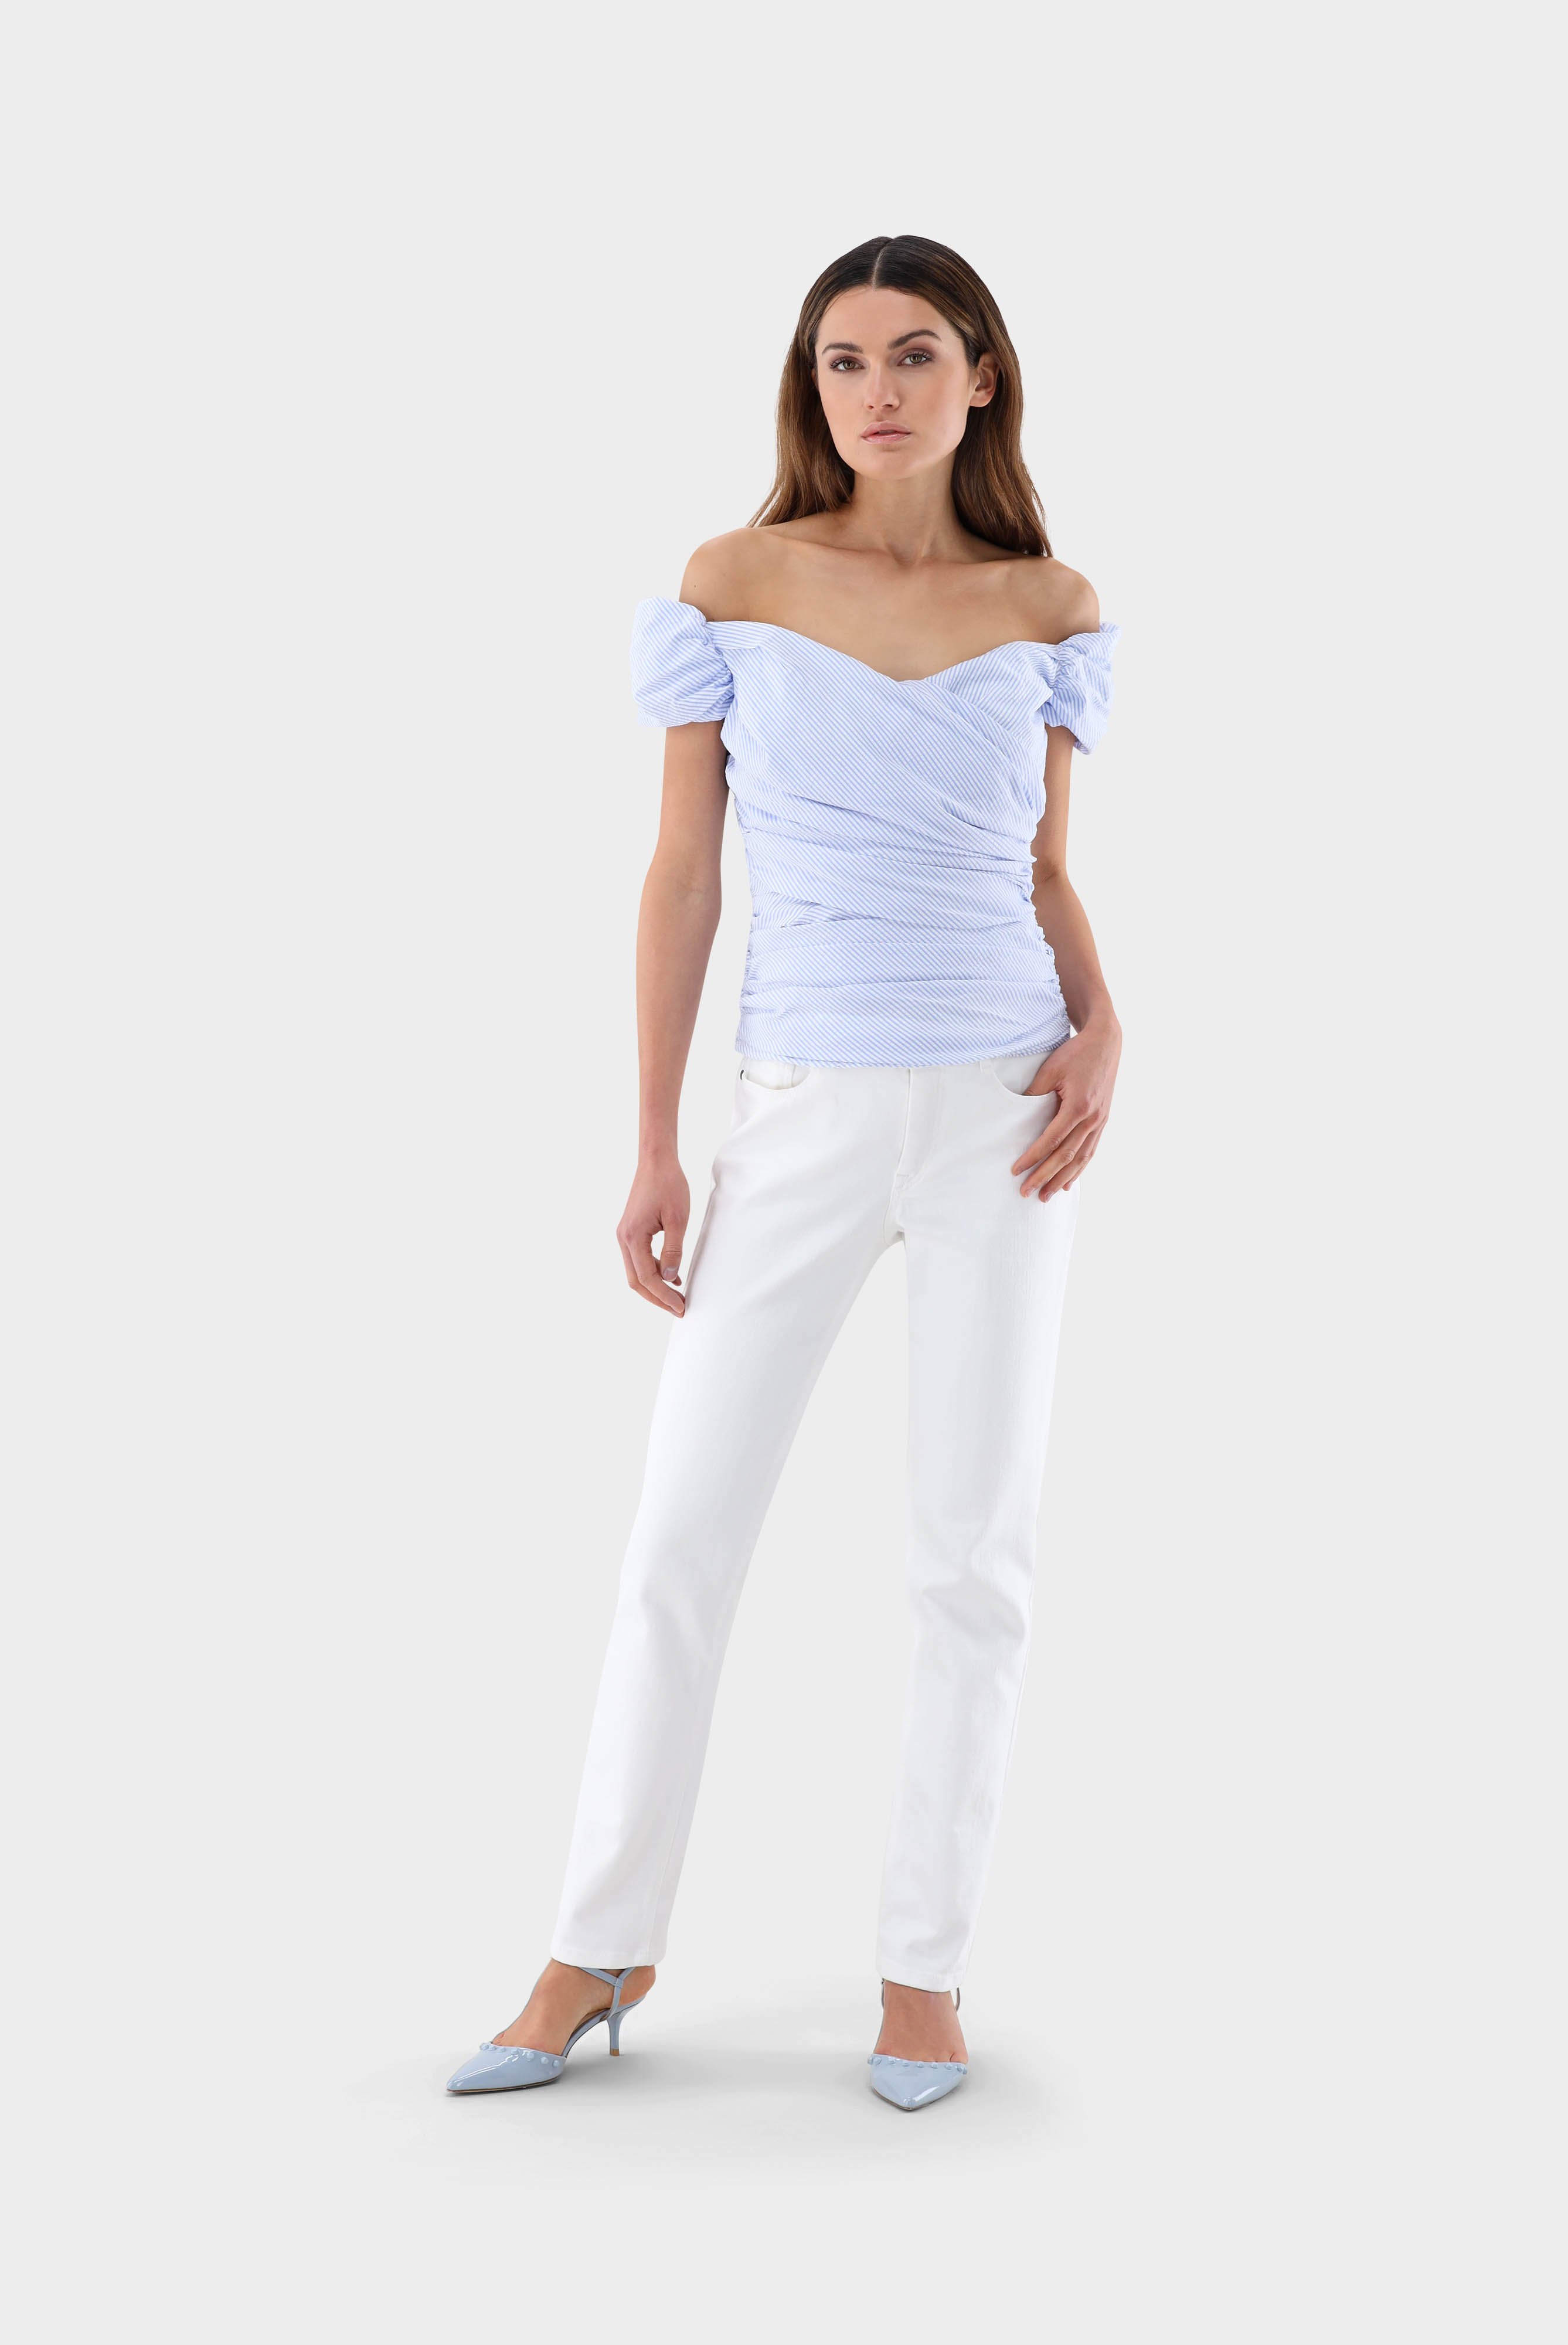 Casual Blouses+Bodice with Stripe Pattern+05.5288.18.151054.720.40